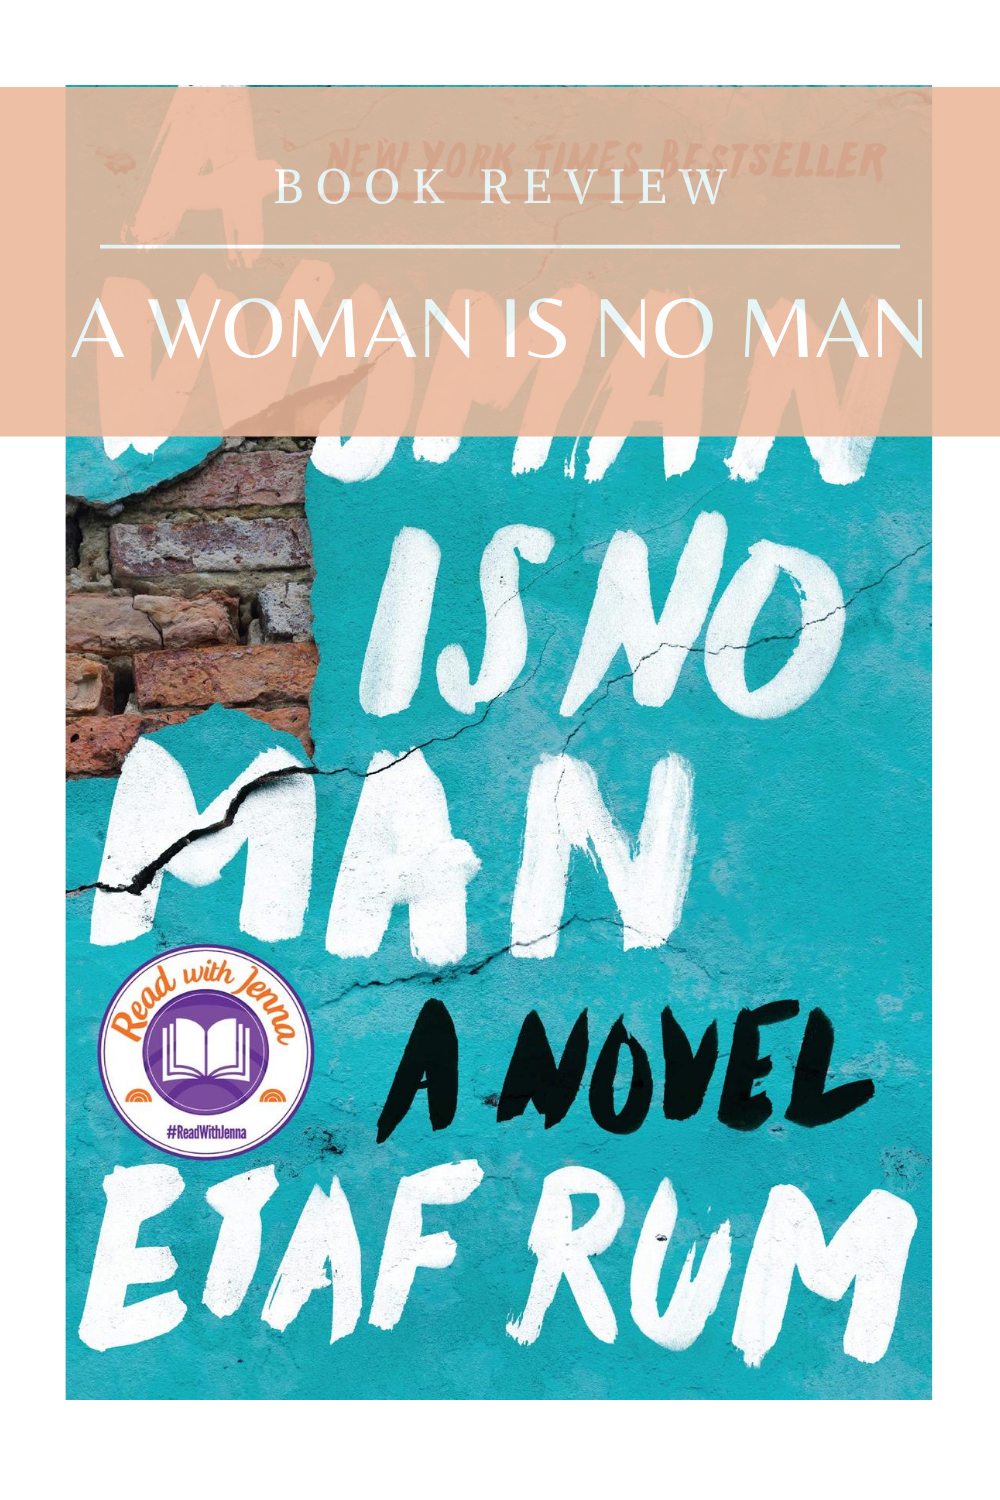 A Woman Is No Man by Etaf Rum book review